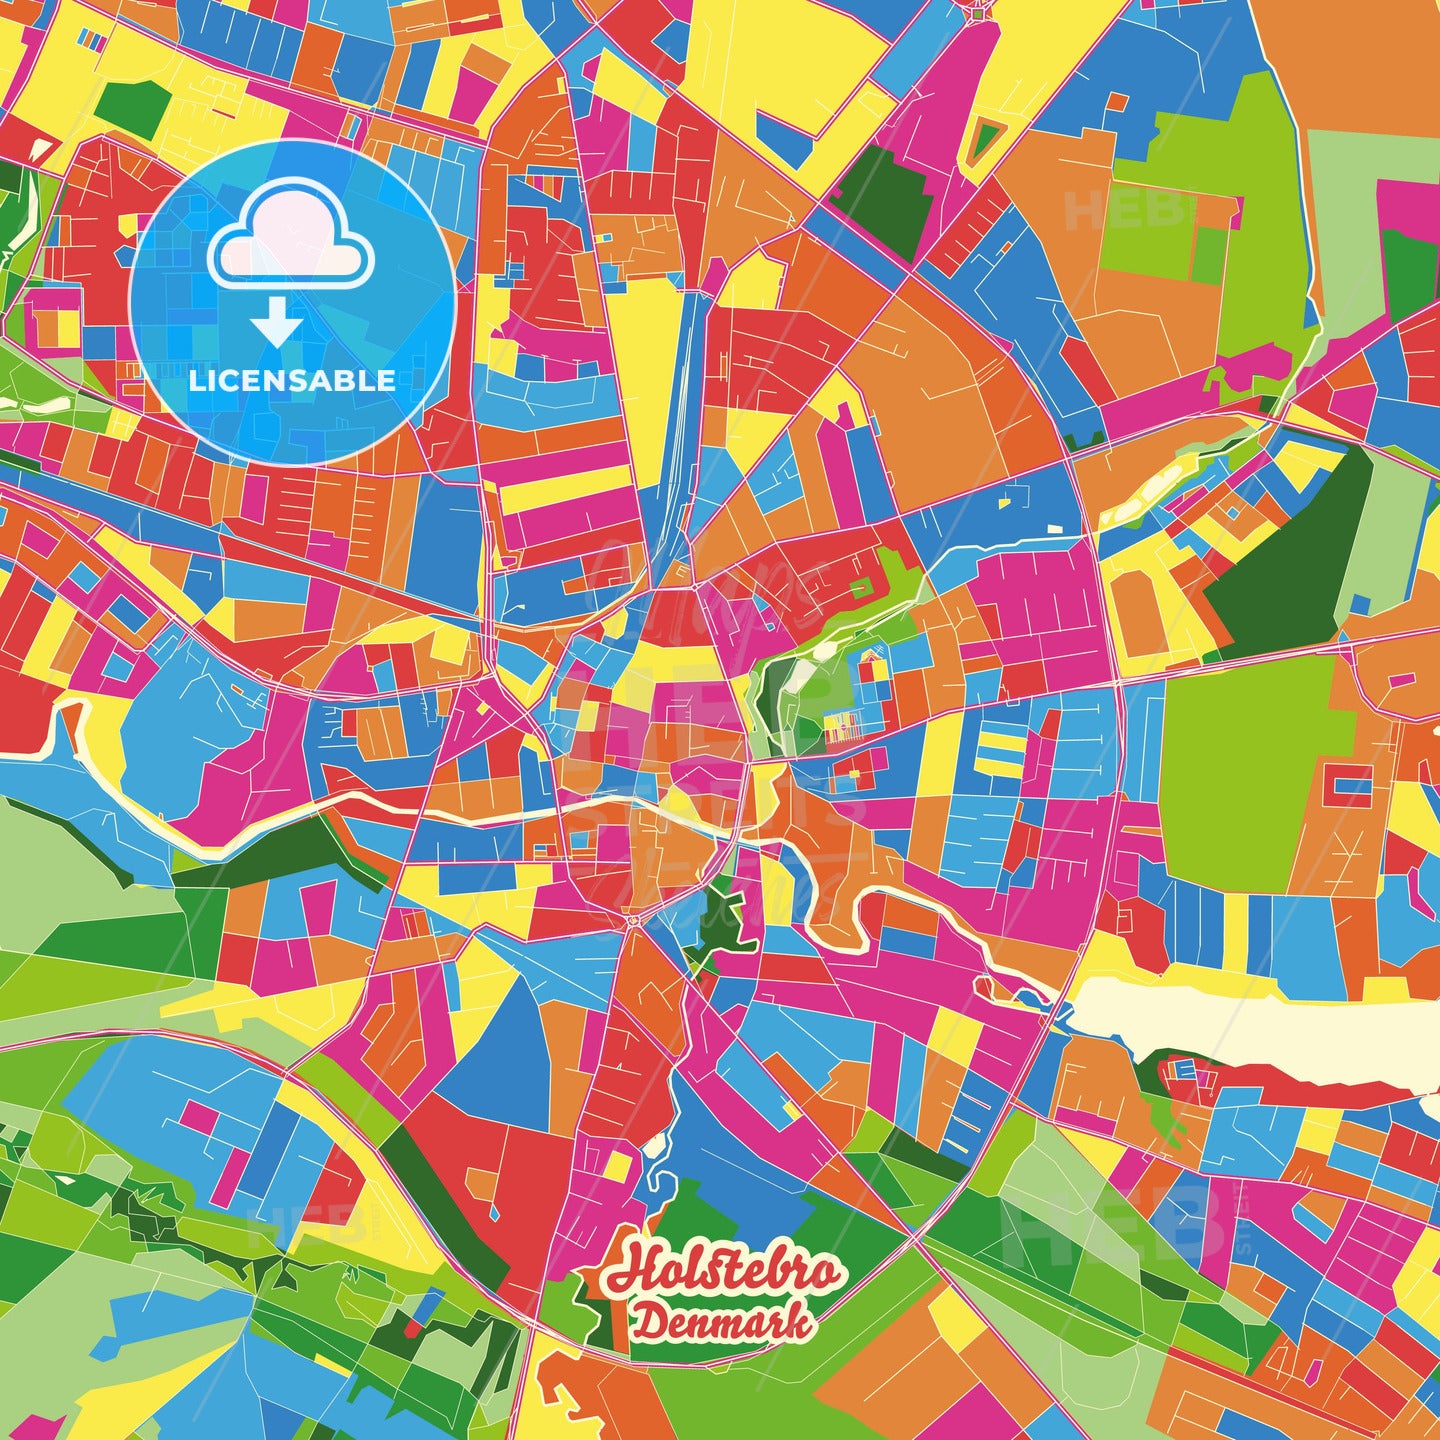 Holstebro, Denmark Crazy Colorful Street Map Poster Template - HEBSTREITS Sketches